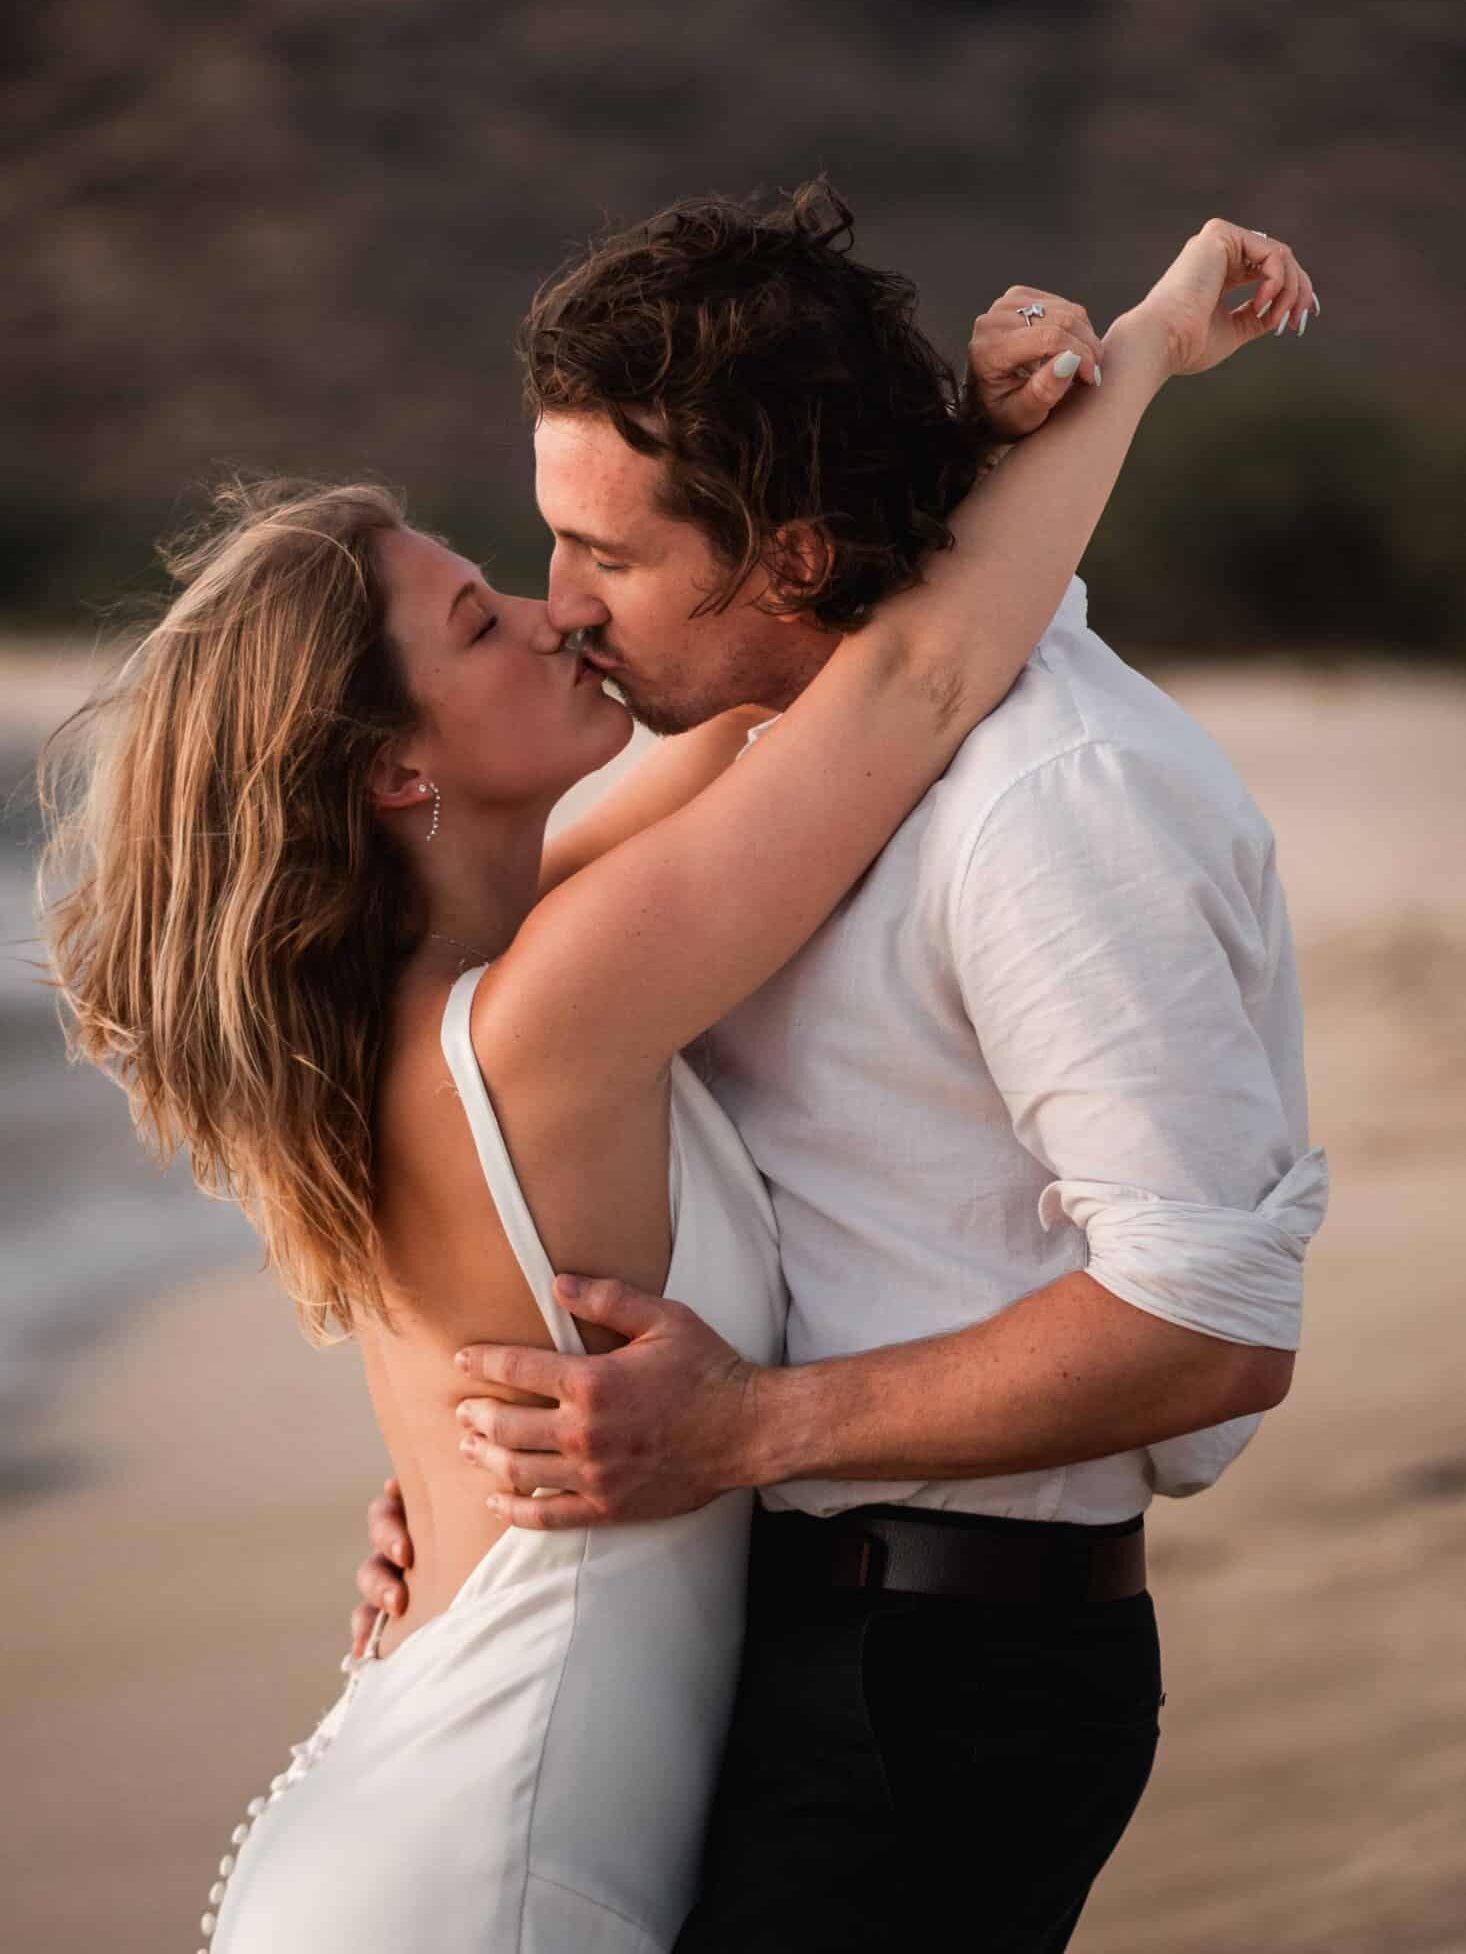 Beach engagement photos of a couple passionately embracing and kissing. The woman, wearing a white dress, has her arm draped over the man's shoulder, showing off an engagement ring. The man, dressed in a white shirt and black trousers, holds her close, with the muted colors of the beach and hills in the background